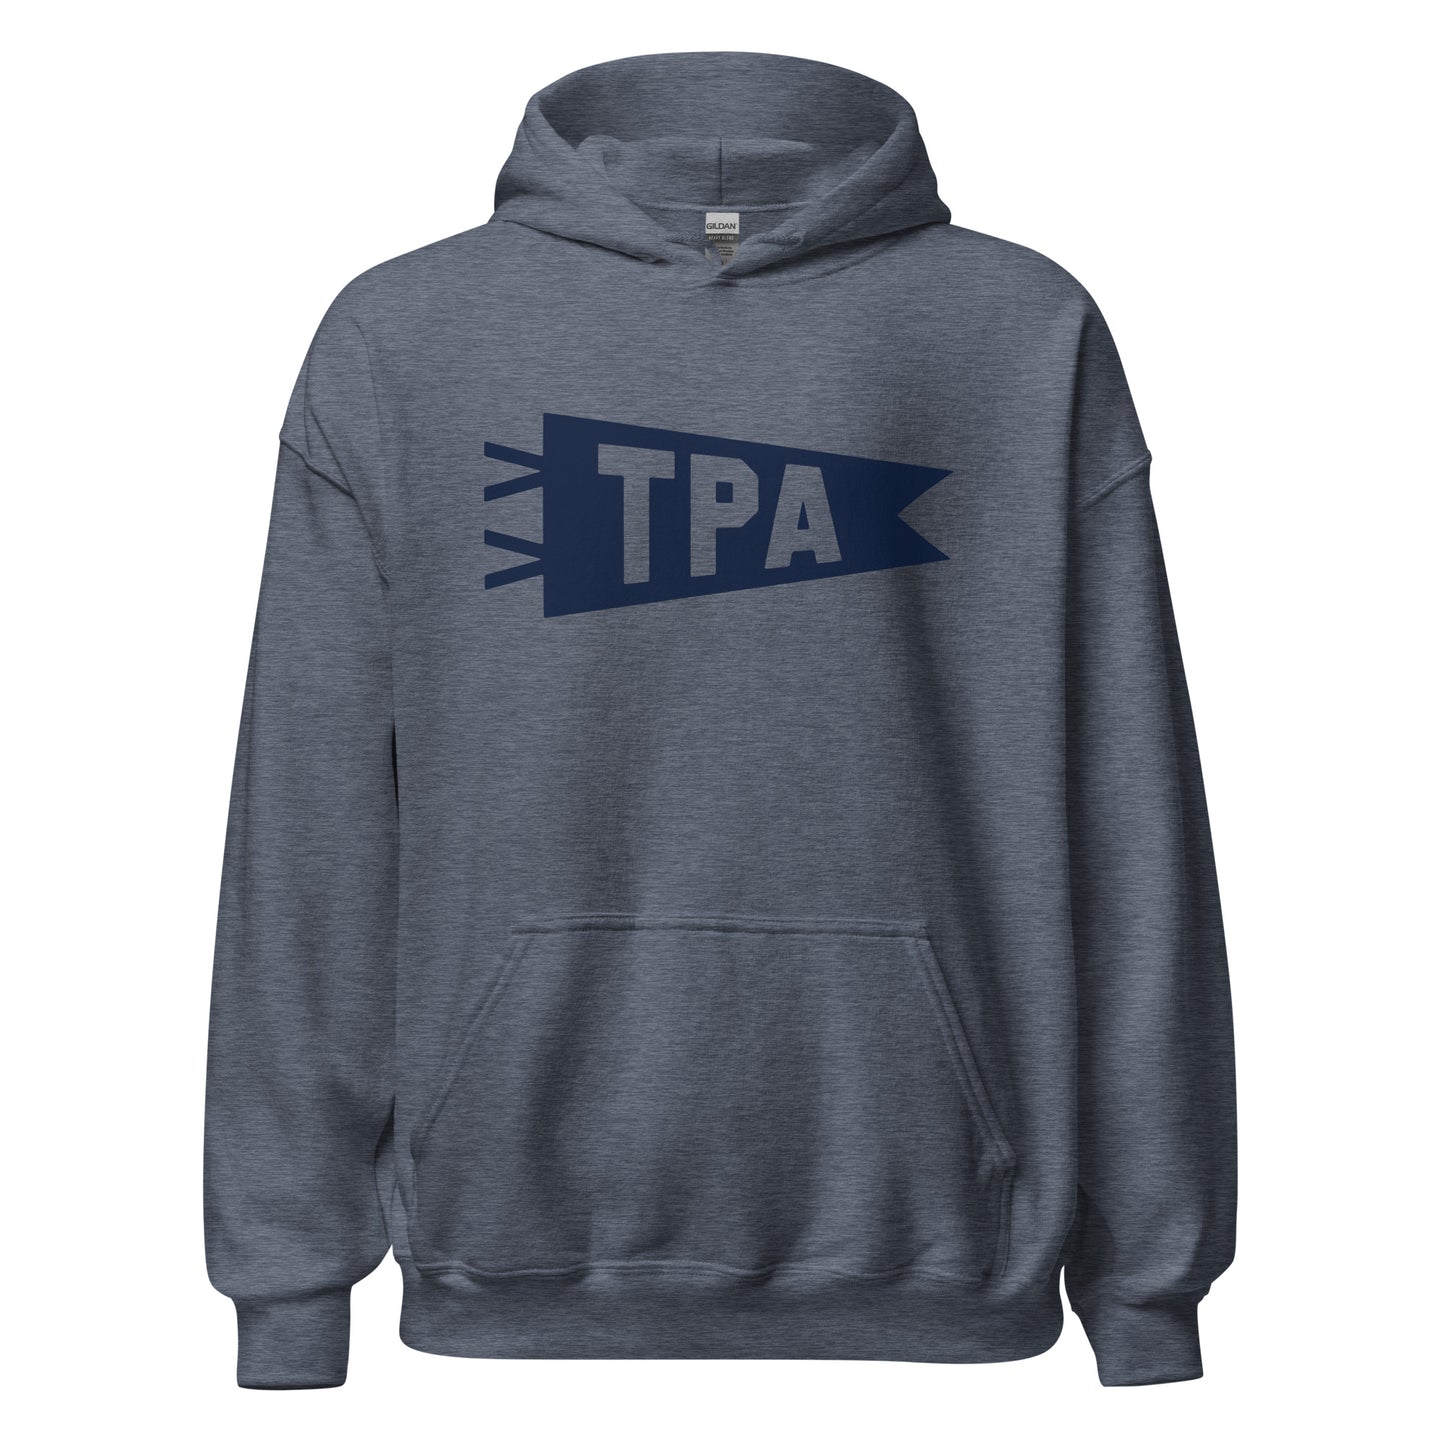 Airport Code Unisex Hoodie - Navy Blue Graphic • TPA Tampa • YHM Designs - Image 05